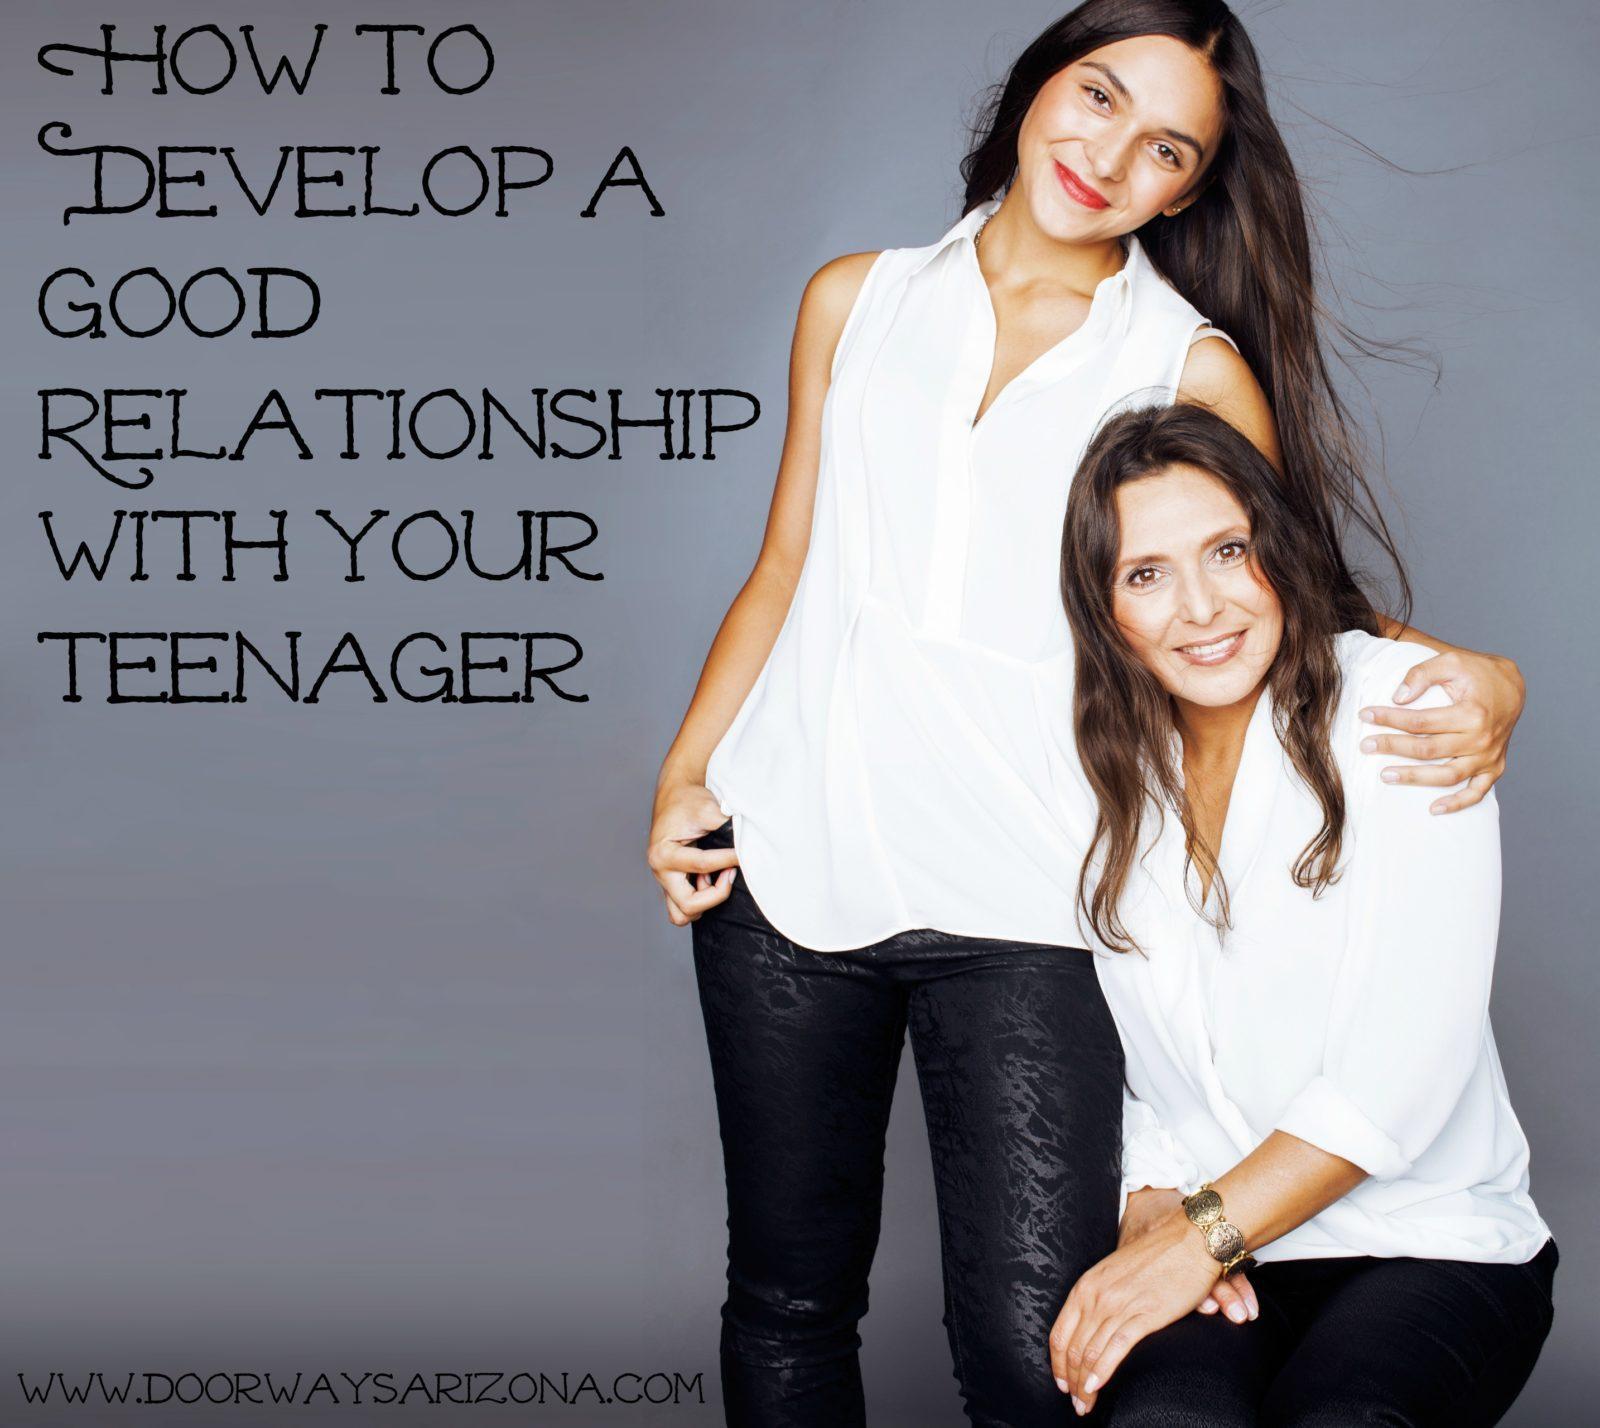 How to Have a Good Relationship With Your Teenage Daughter 11888